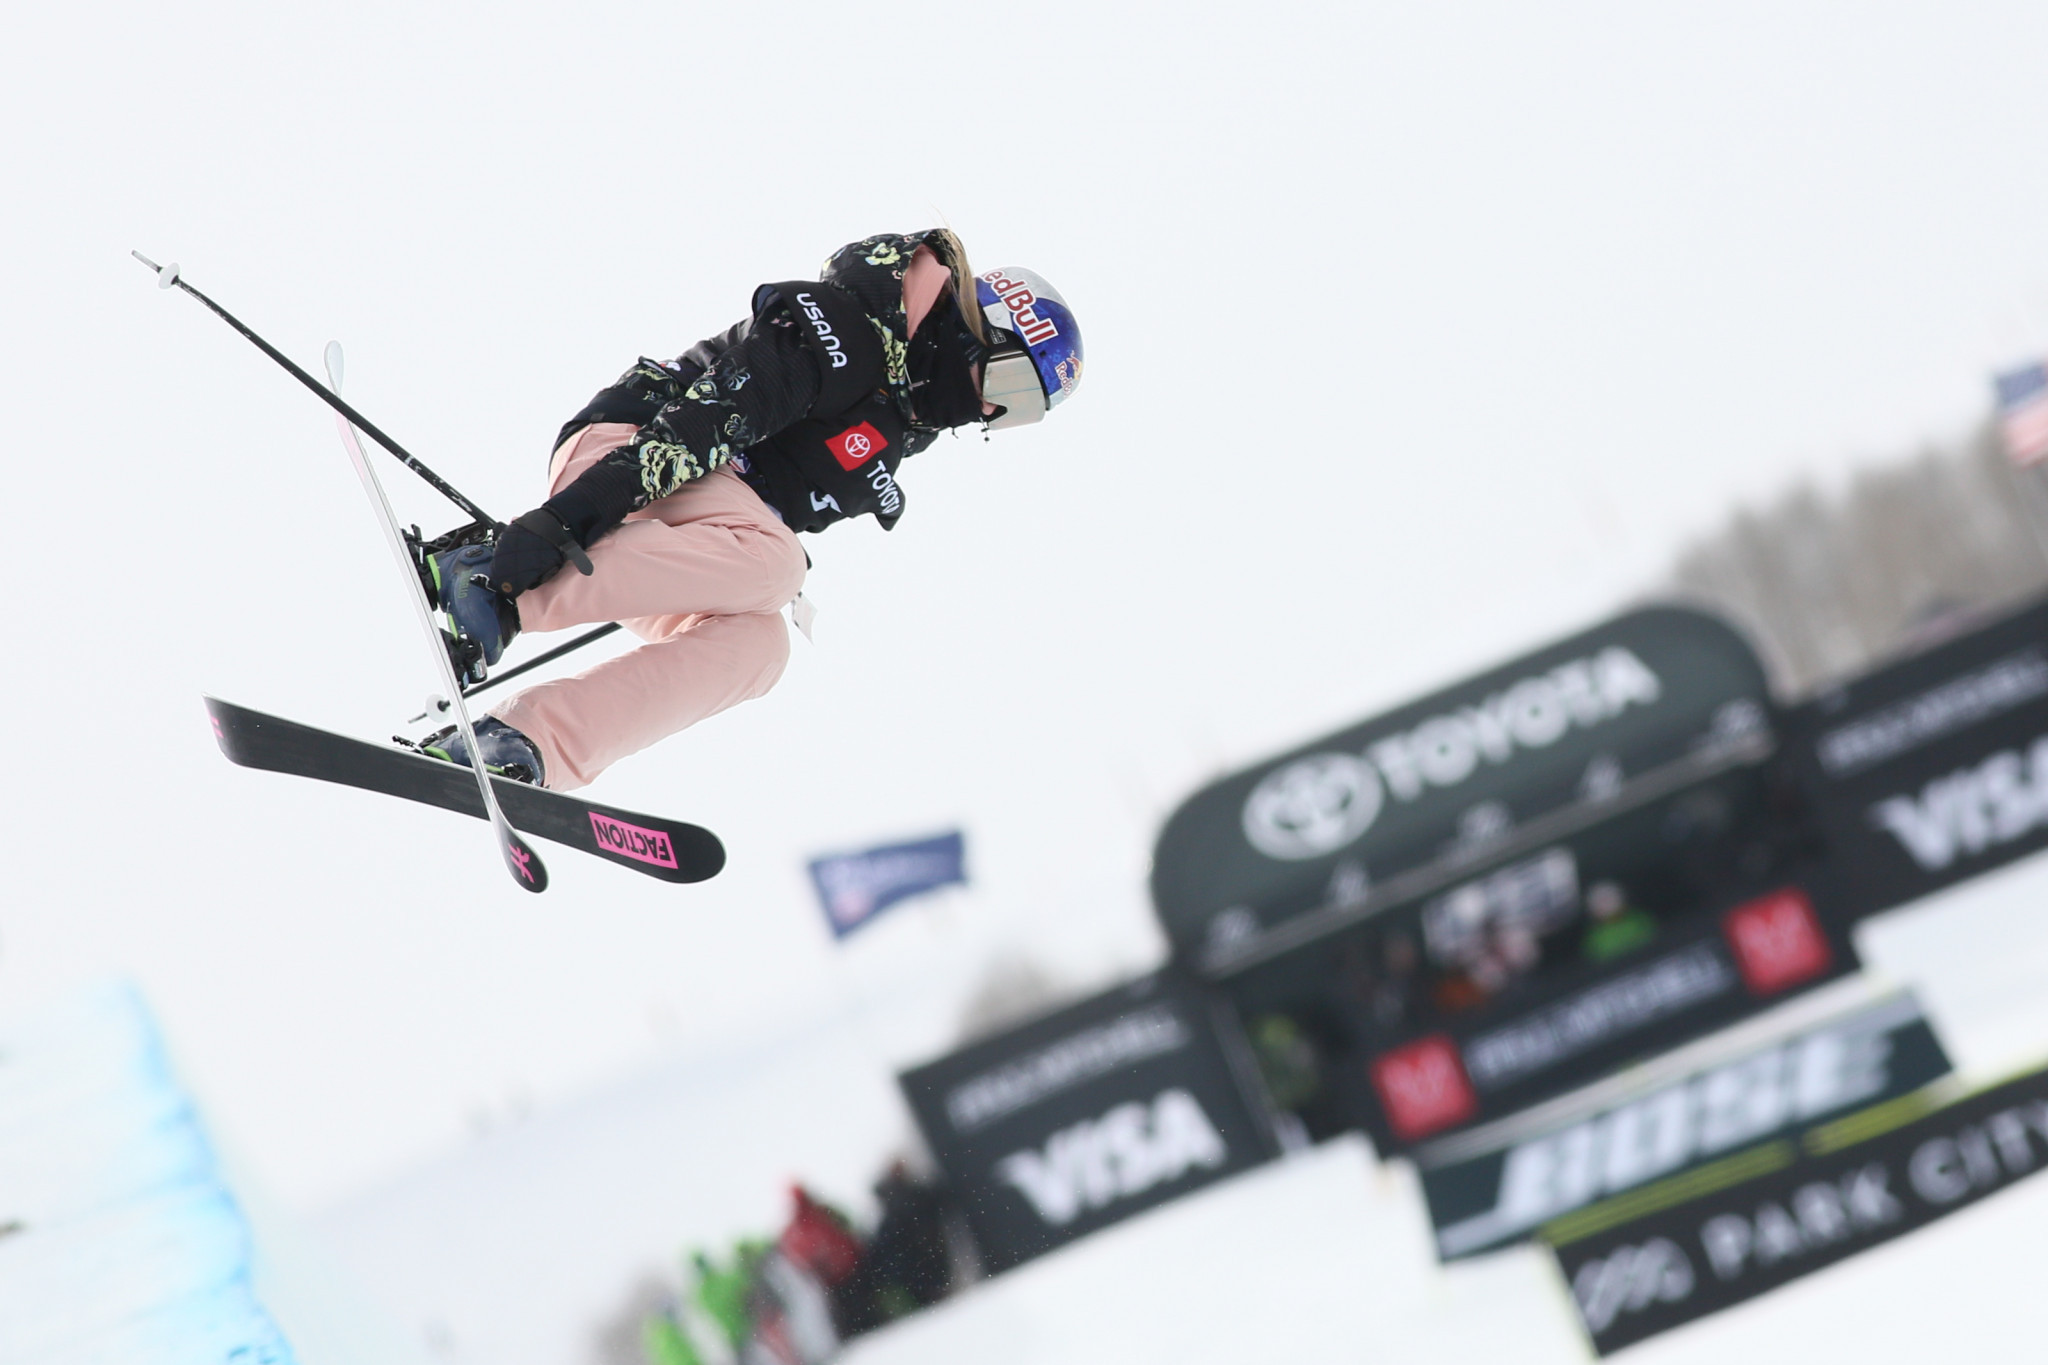 Estonian Kelly Sildaru became the youngest freeski halfpipe world champion in history as she claimed the gold medal with a superb display at the FIS Ski and Snowboard World Championships in Utah ©Getty Images